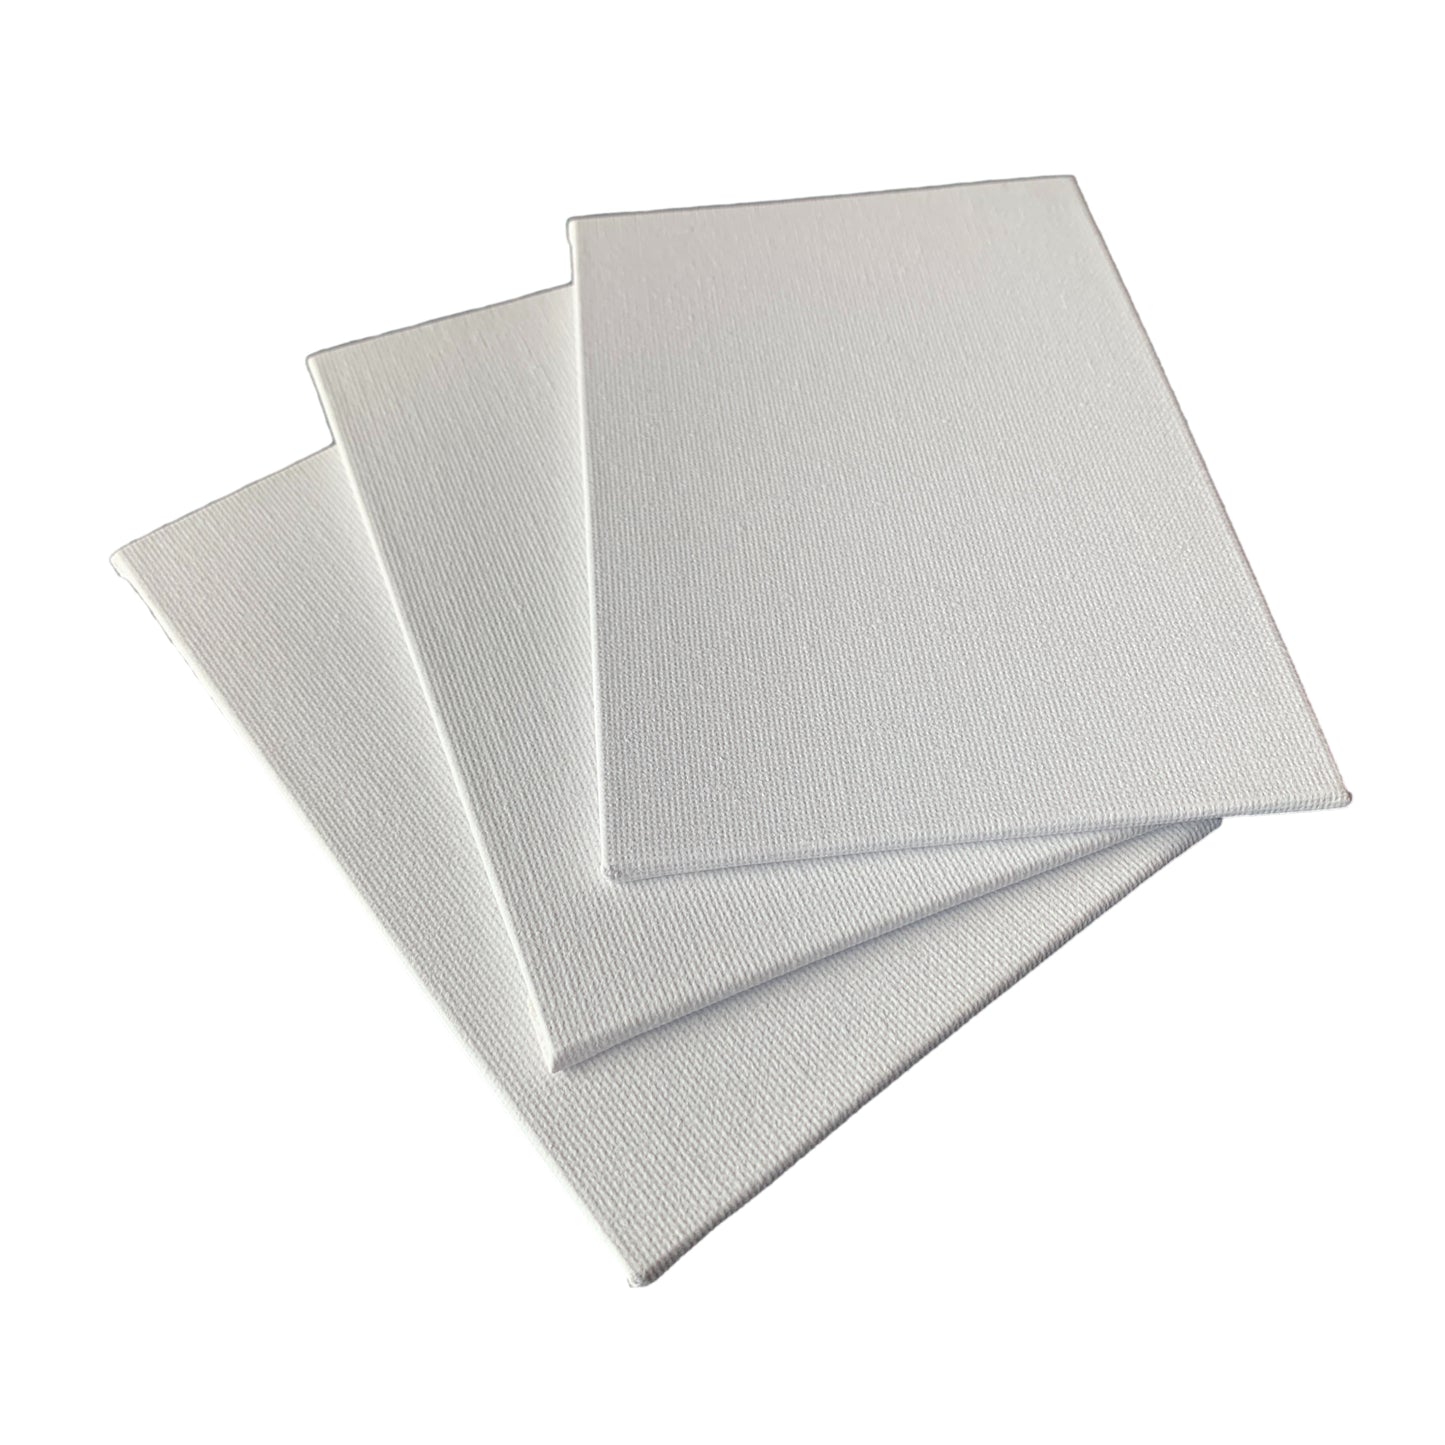 10x15cm Blank White Flat Stretched Board Art Canvas By Janrax